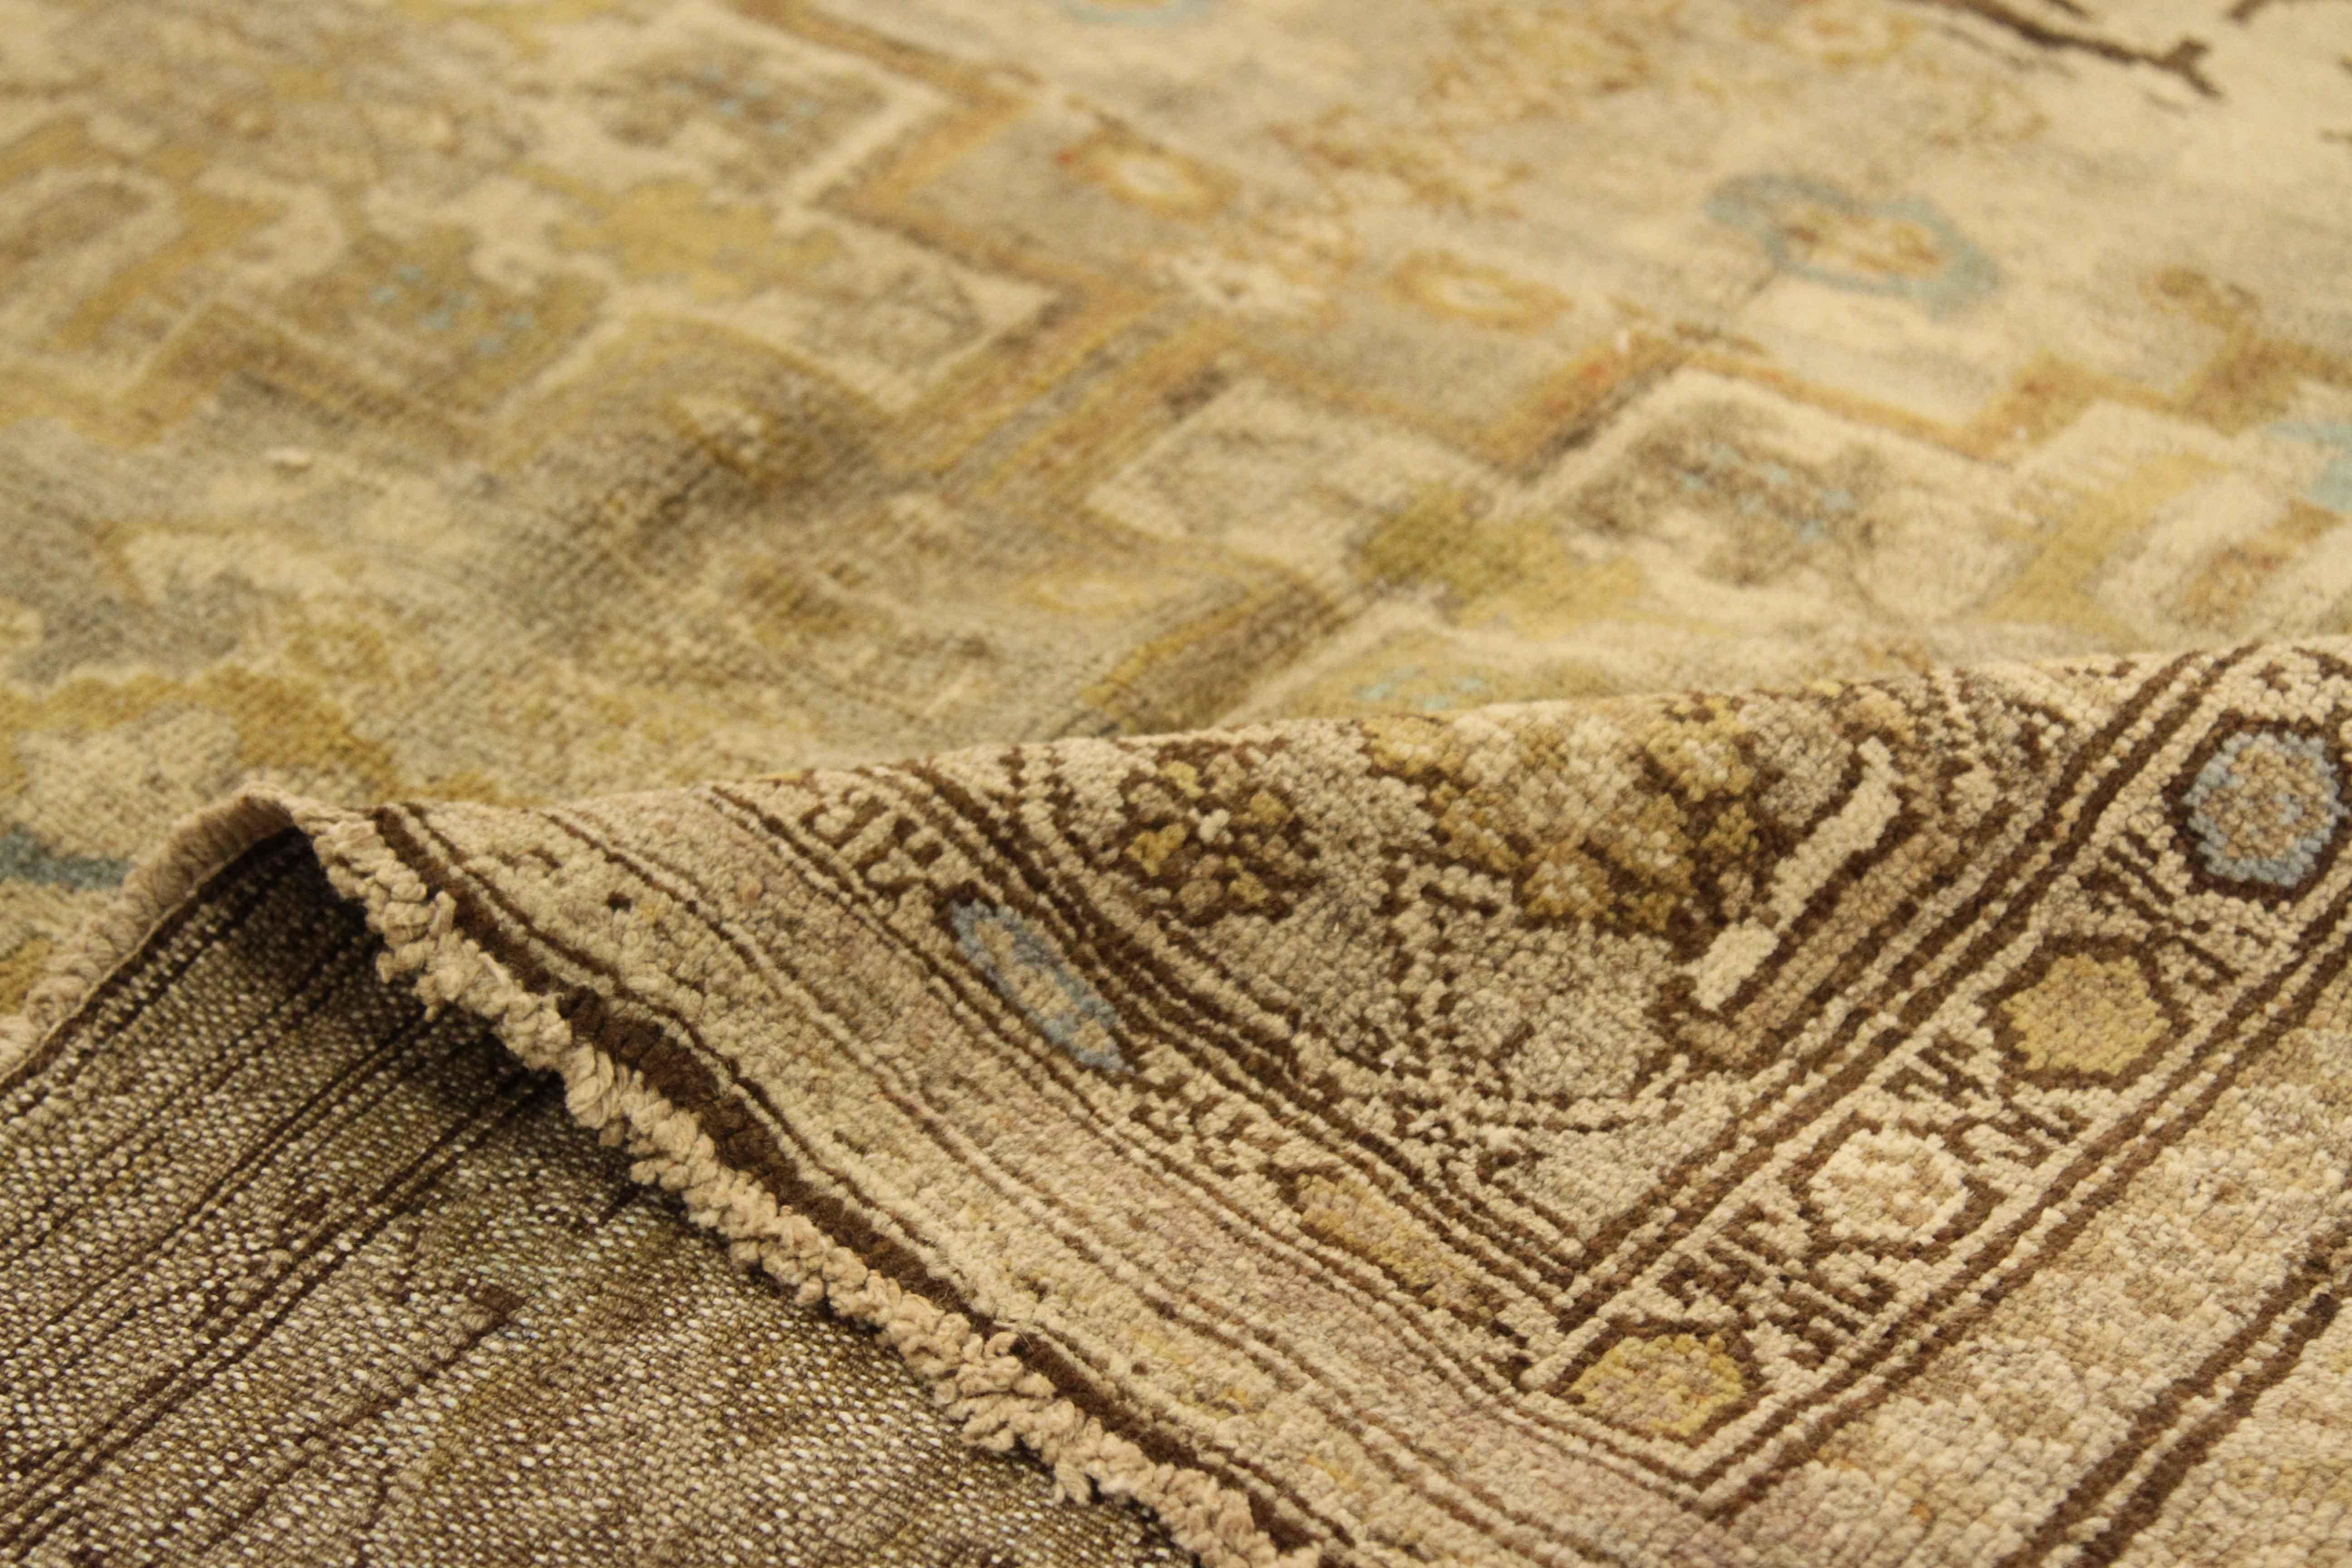 Handwoven in the 1940s, this antique Persian rug is made of fine wool and dyed with rustic colors such as brown, beige, ivory, and some touches of blue. Ancient Malayer weavers were inspired by nature and this piece has a fading pattern depicting